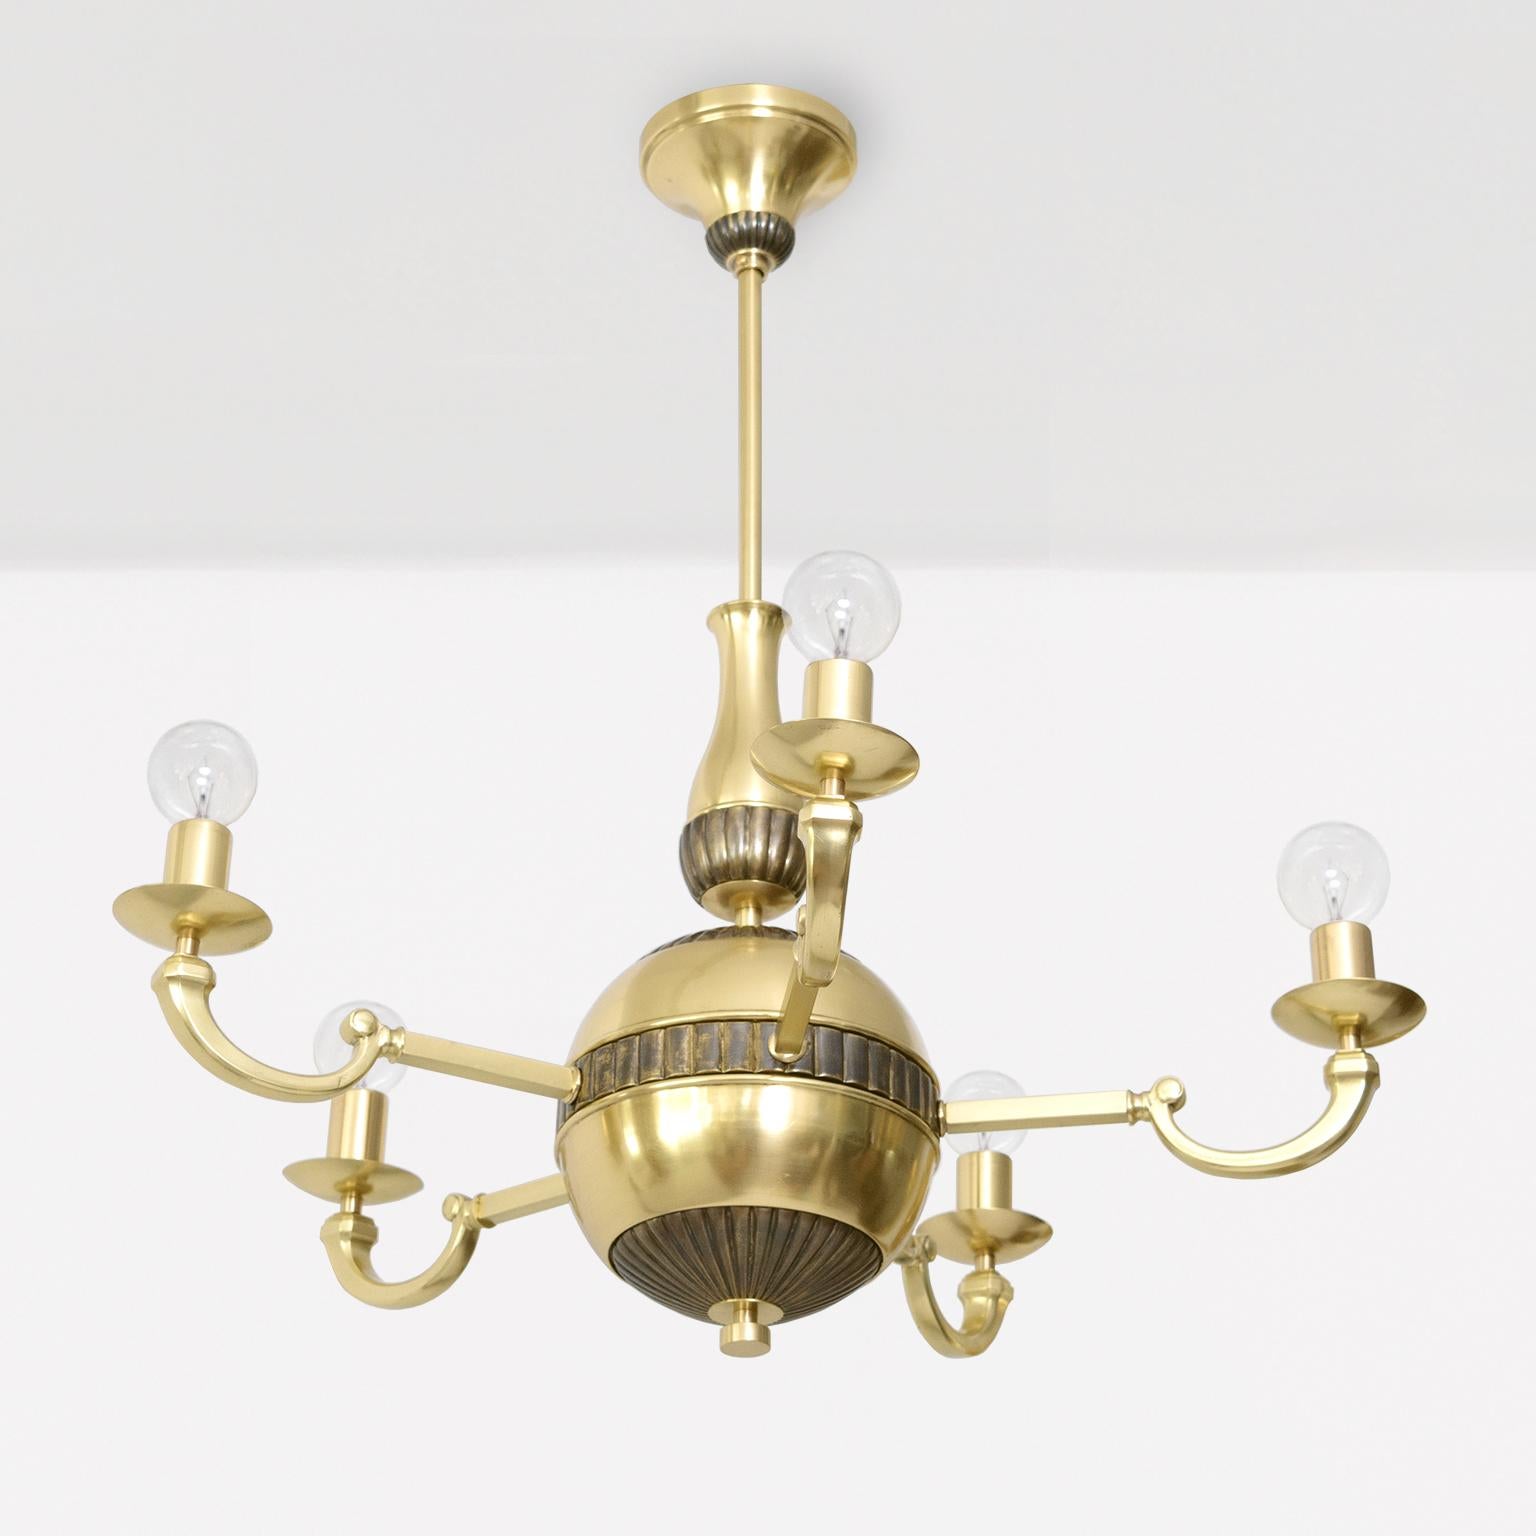 Swedish Art Deco Brass 5-arm Chandelier with patinated details  In Excellent Condition For Sale In New York, NY